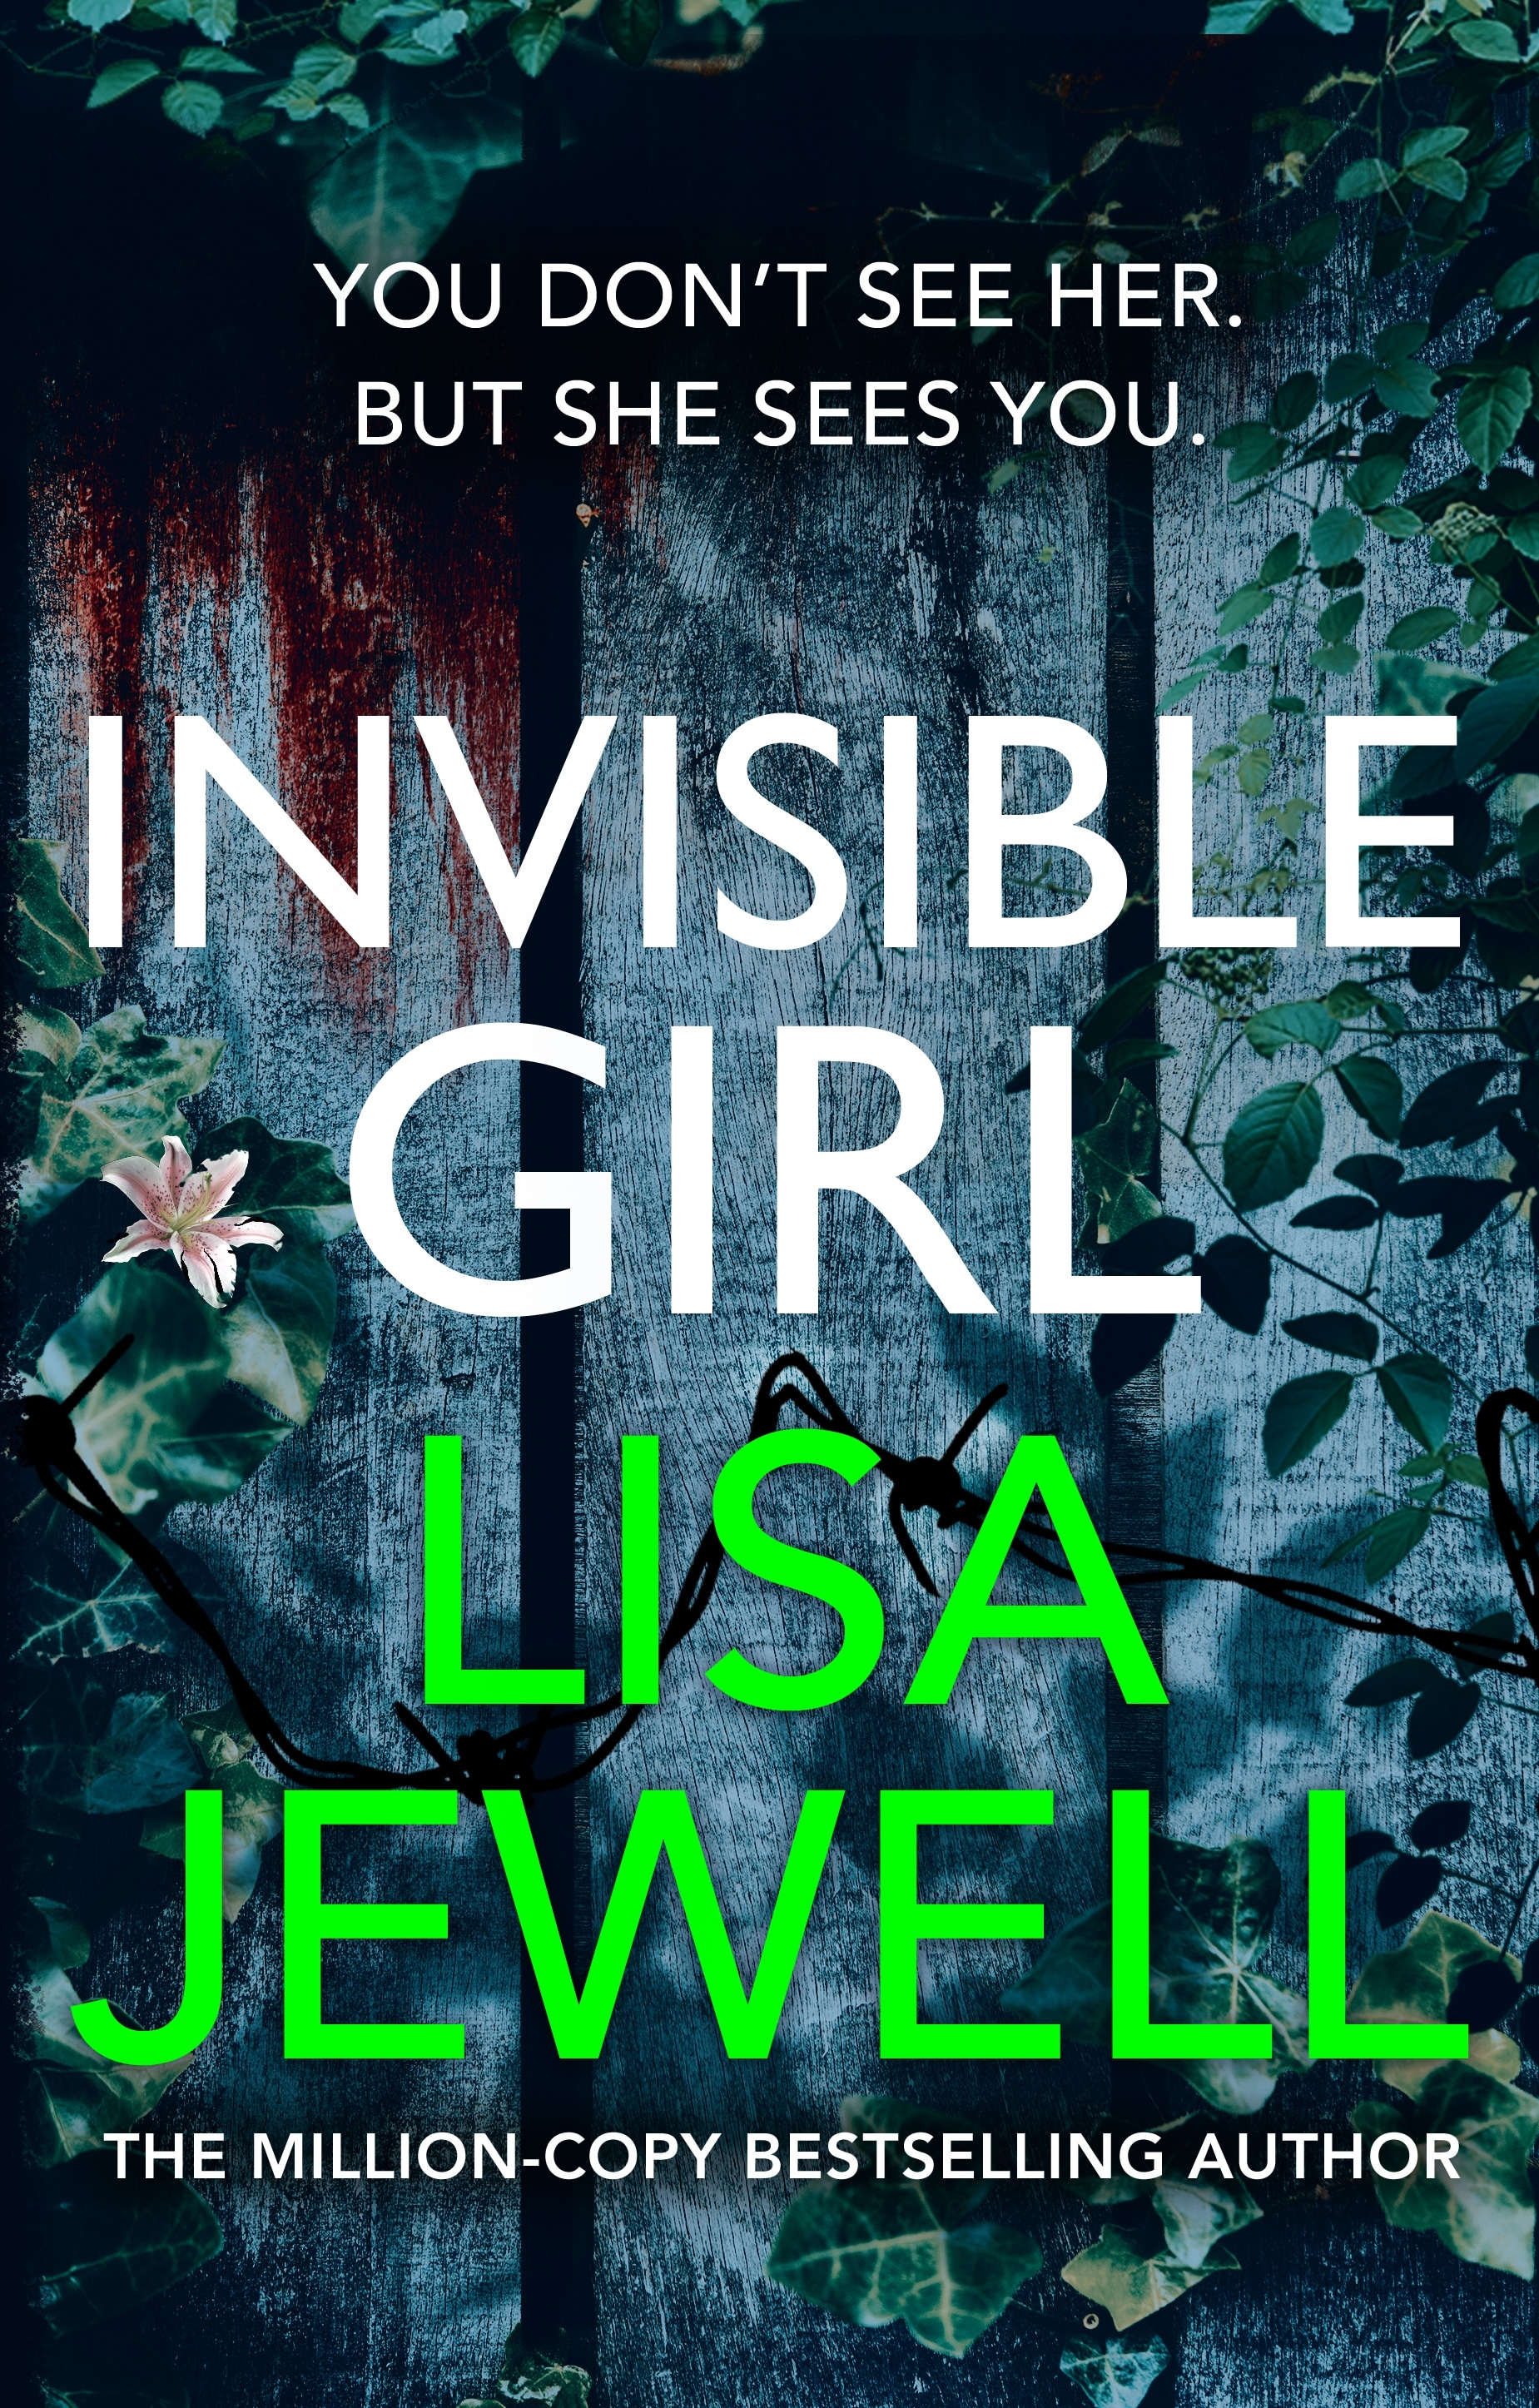 Book “Invisible Girl” by Lisa Jewell — August 6, 2020